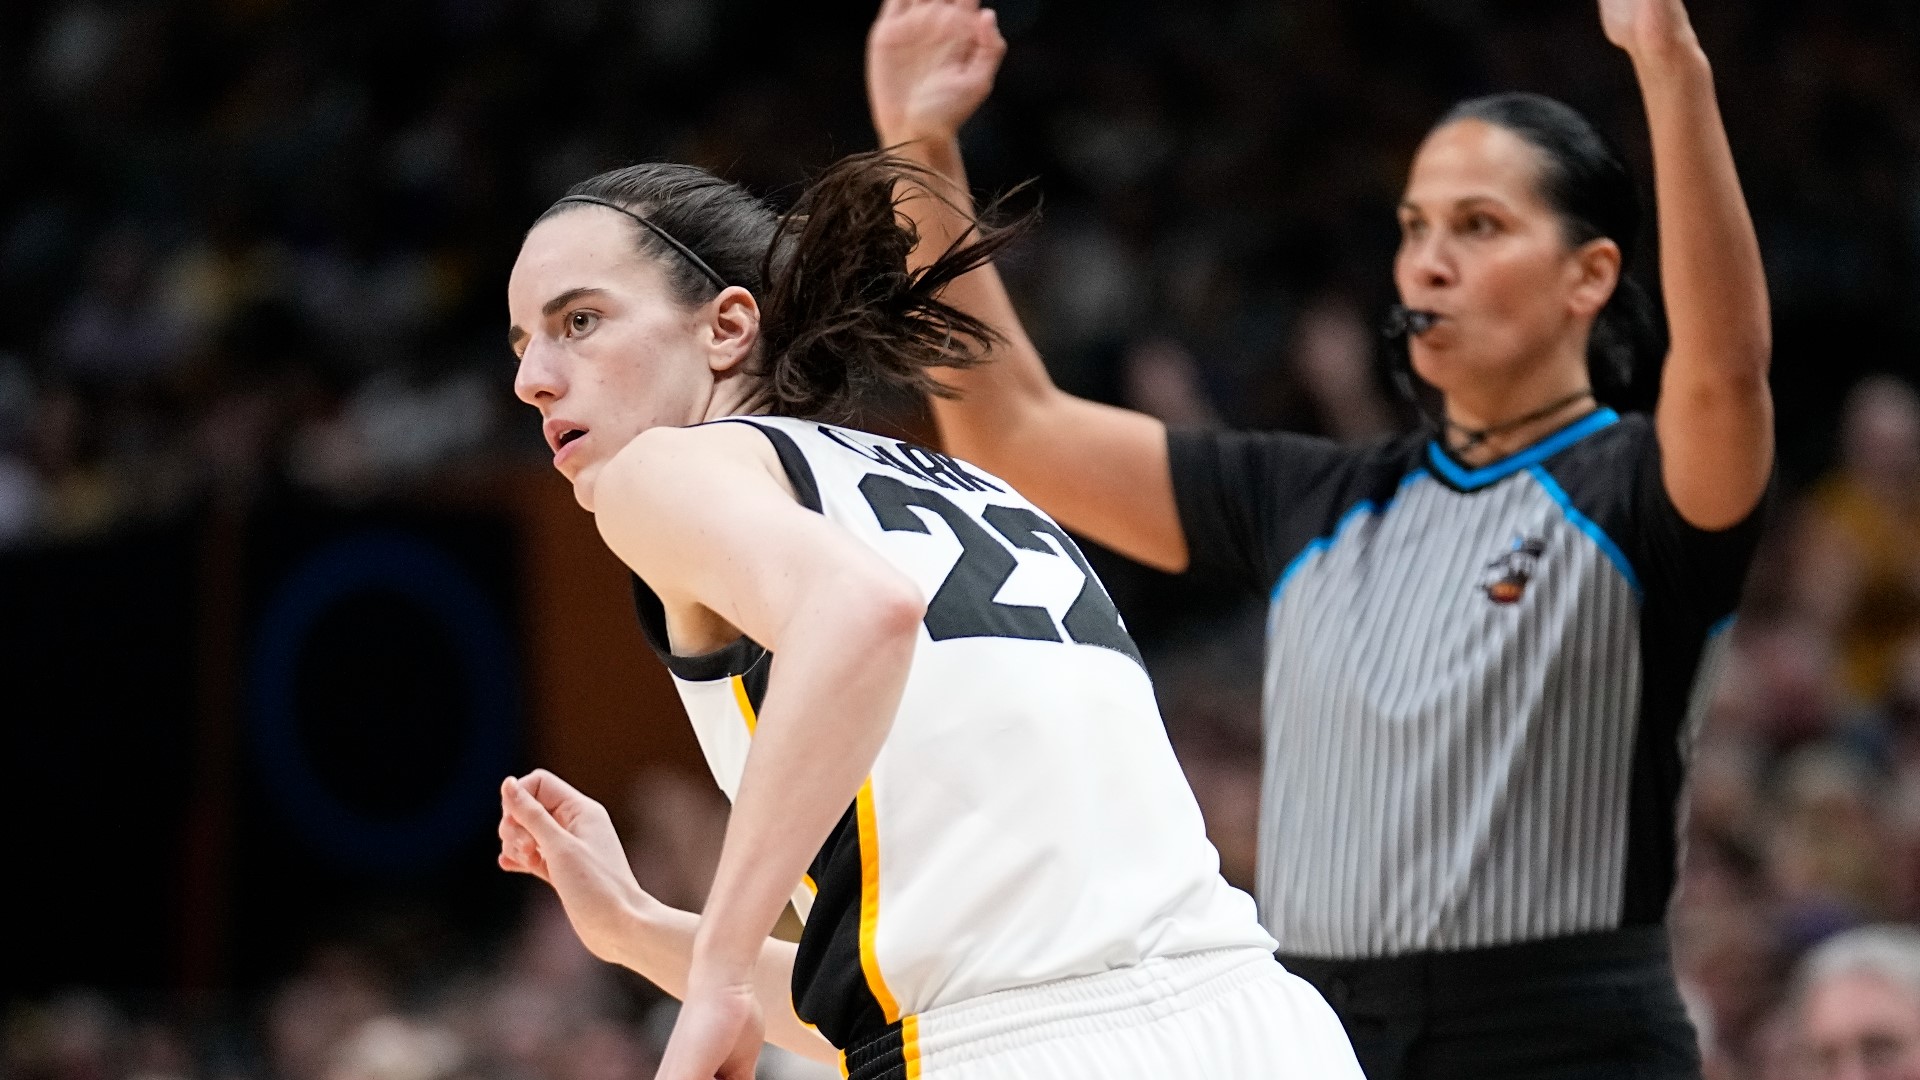 The Iowa women's basketball team continues to prove they're one of the most popular teams in the country by selling out of season tickets for the upcoming season.